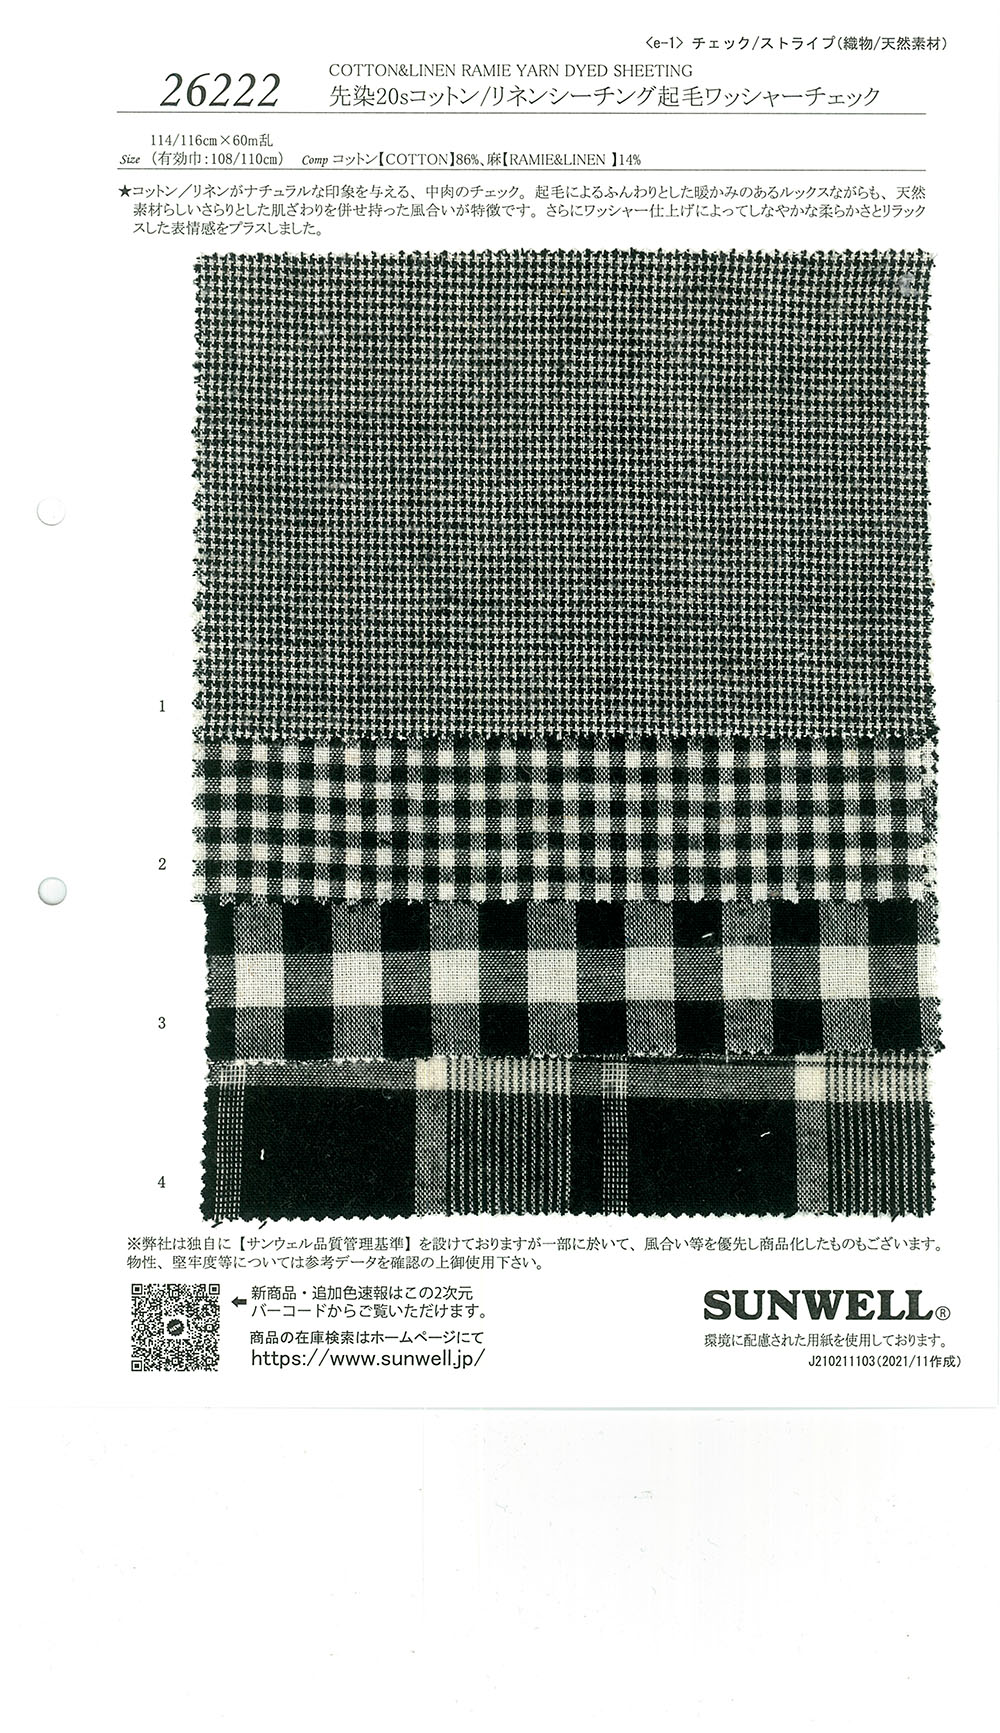 26222 Fils Teints 20 Fils Simples Coton/lin Loomstate Fuzzy Washer Processing Check[Fabrication De Textile] SUNWELL